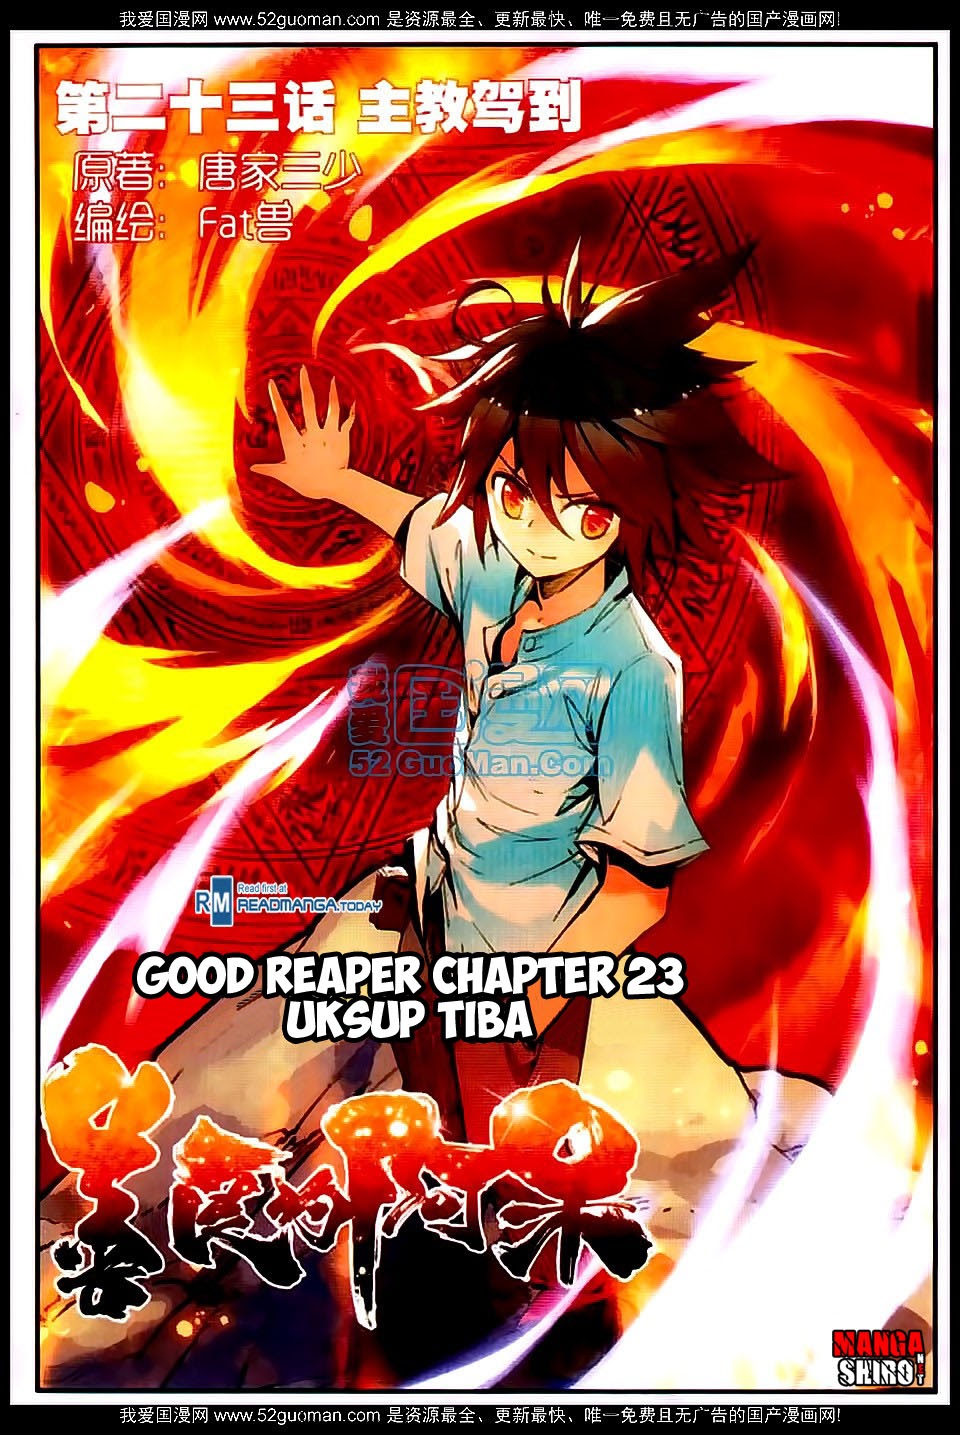 Good Reaper Chapter 23